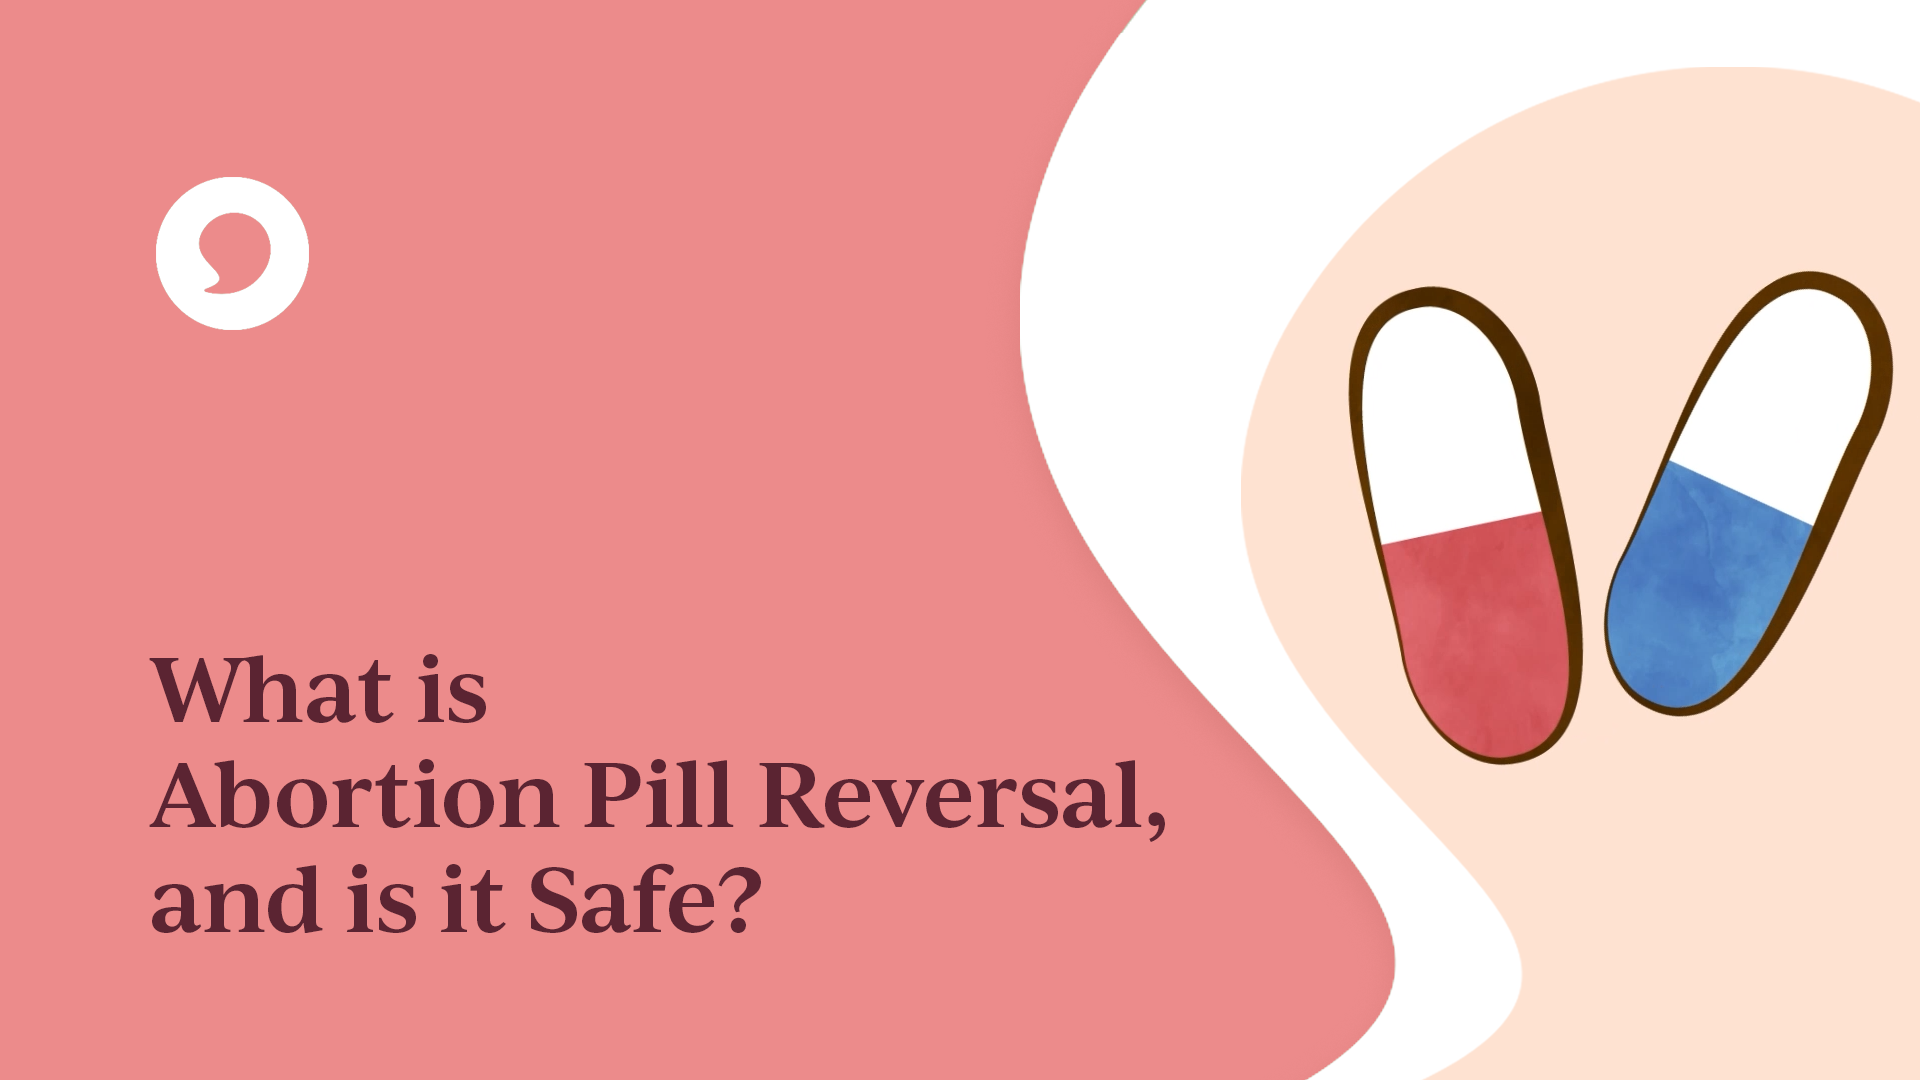 What is Abortion Pill Reversal, and is it Safe?